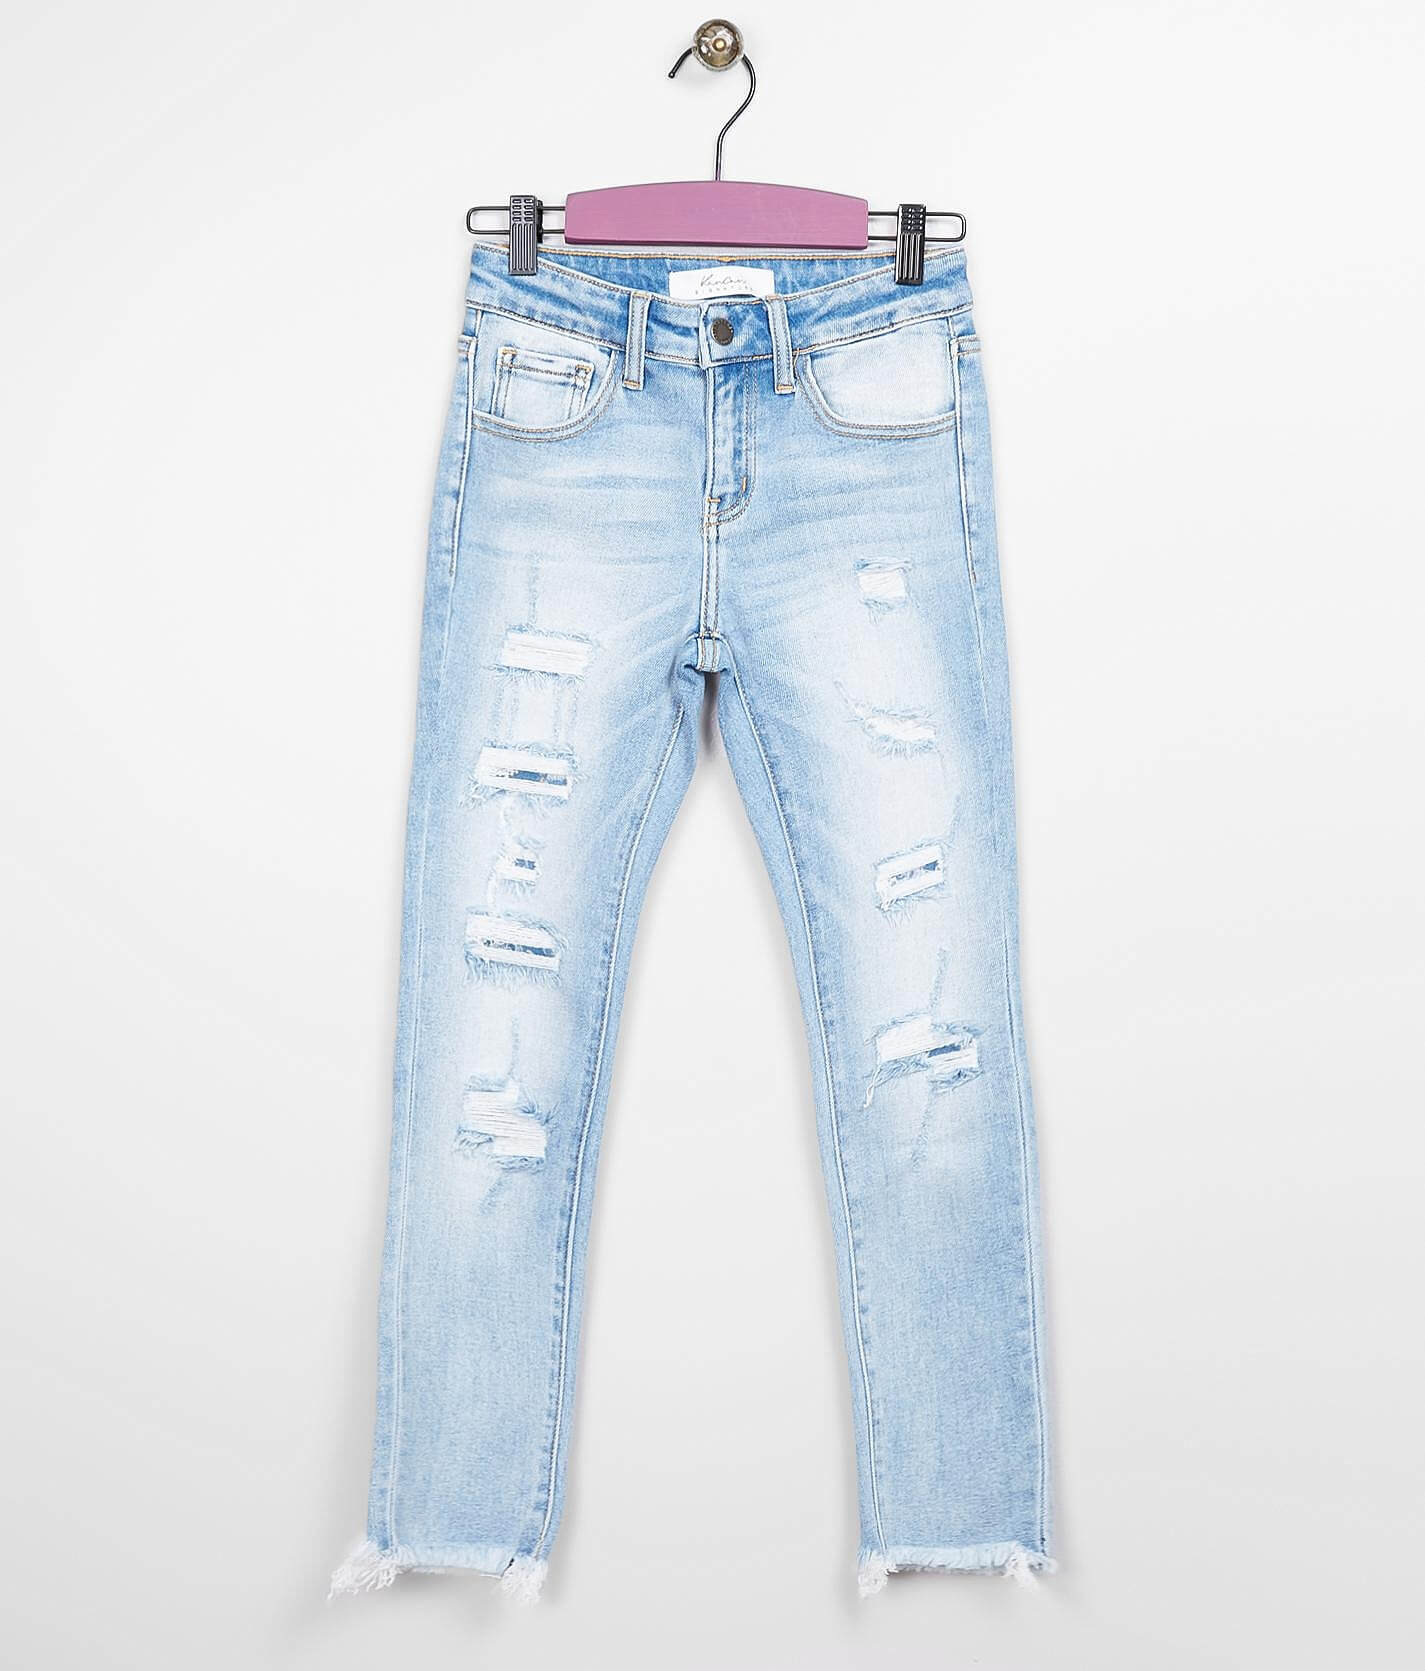 buckle jeans for girls